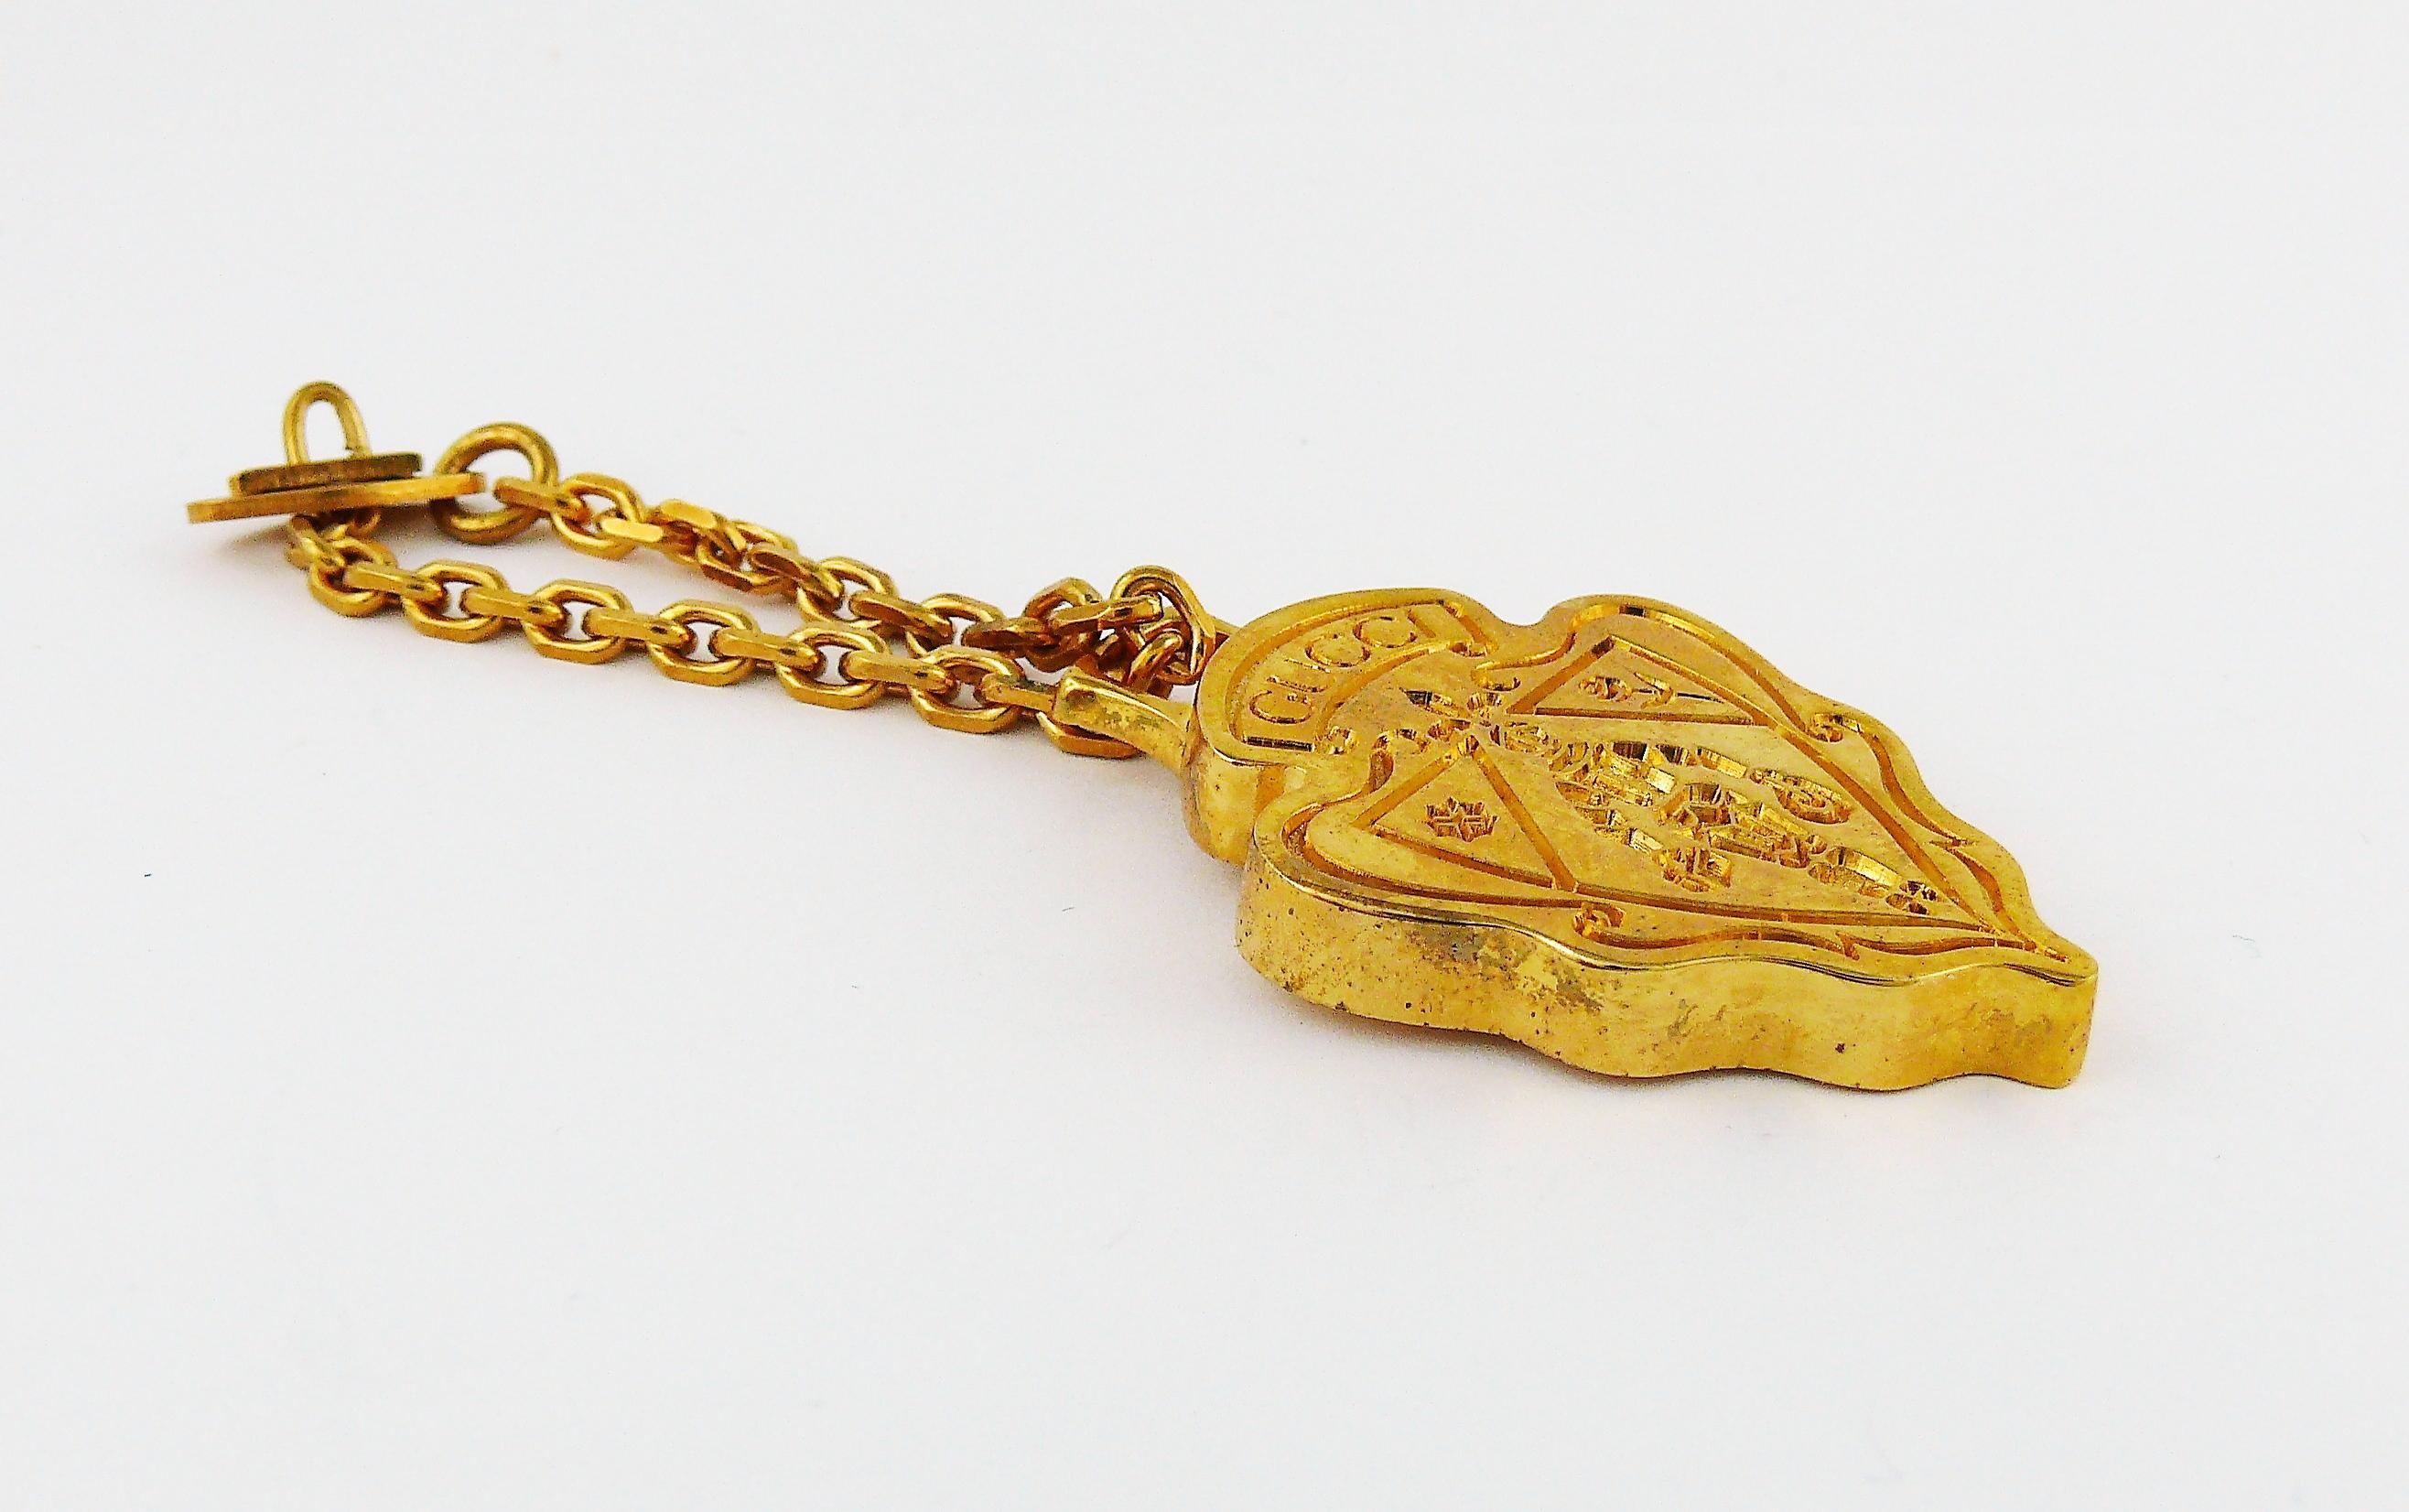 GUCCI Parfums gold toned crest accessory.

Can be used as a keyring or bag charm for instance.

This crest was originaly perfumed with GUCCI NOBILE fragrance. 

Embossed GUCCI on front.
Marked Parfums GUCCI SCANNON S.A. at the rear.

Indicative